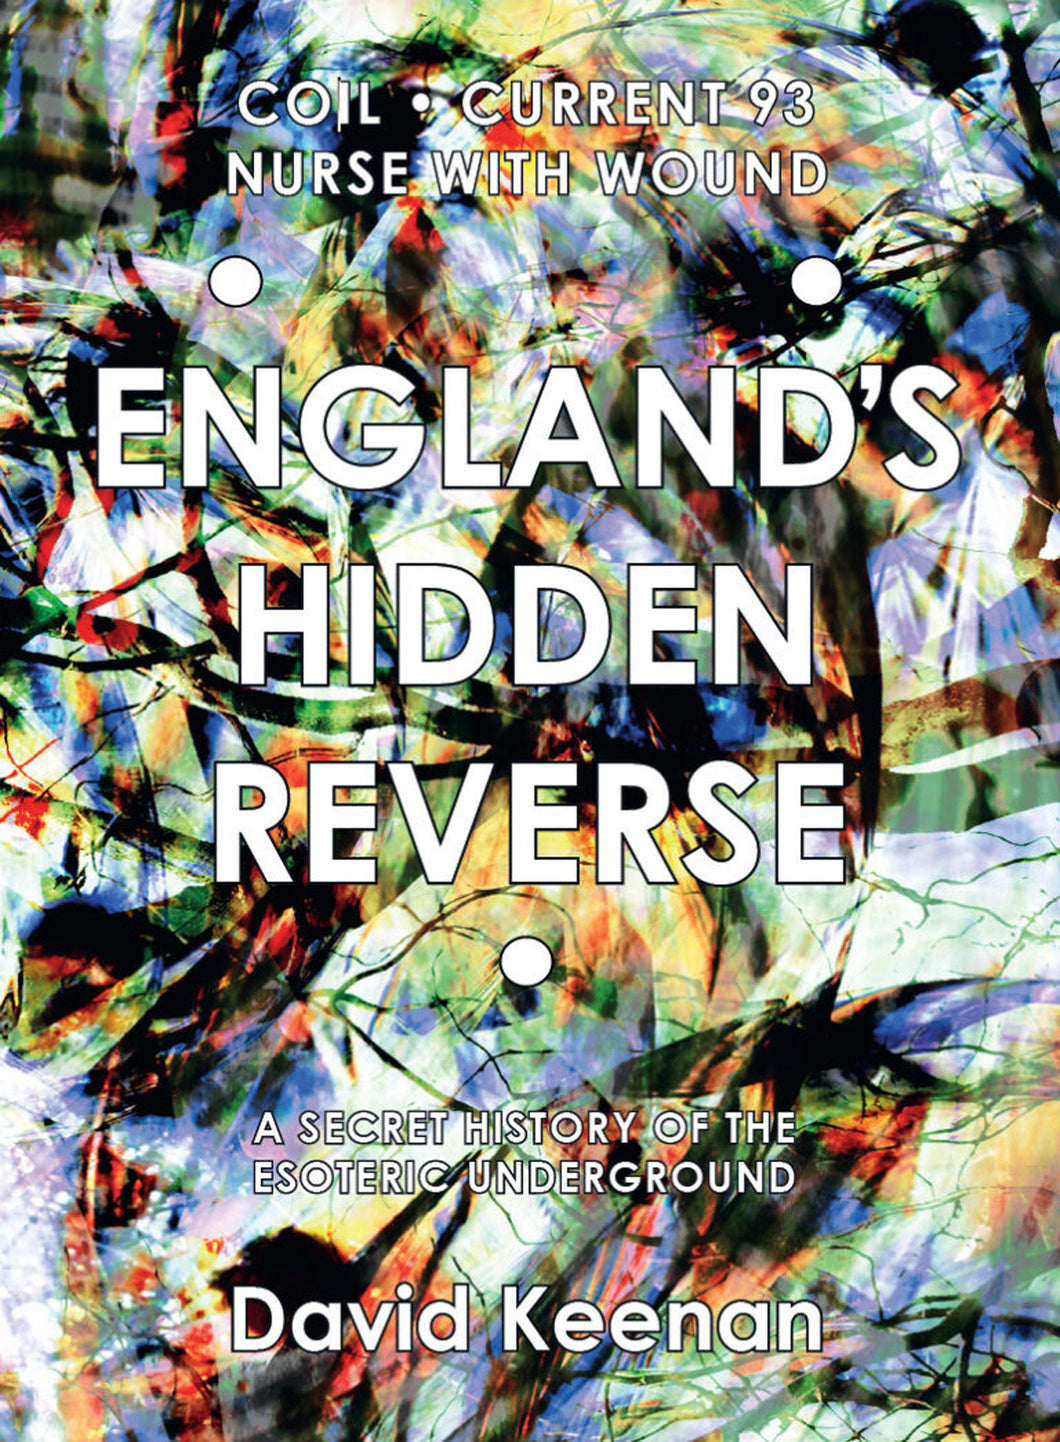 England's Hidden Reverse, revised and expanded edition: A Secret History of the Esoteric Underground